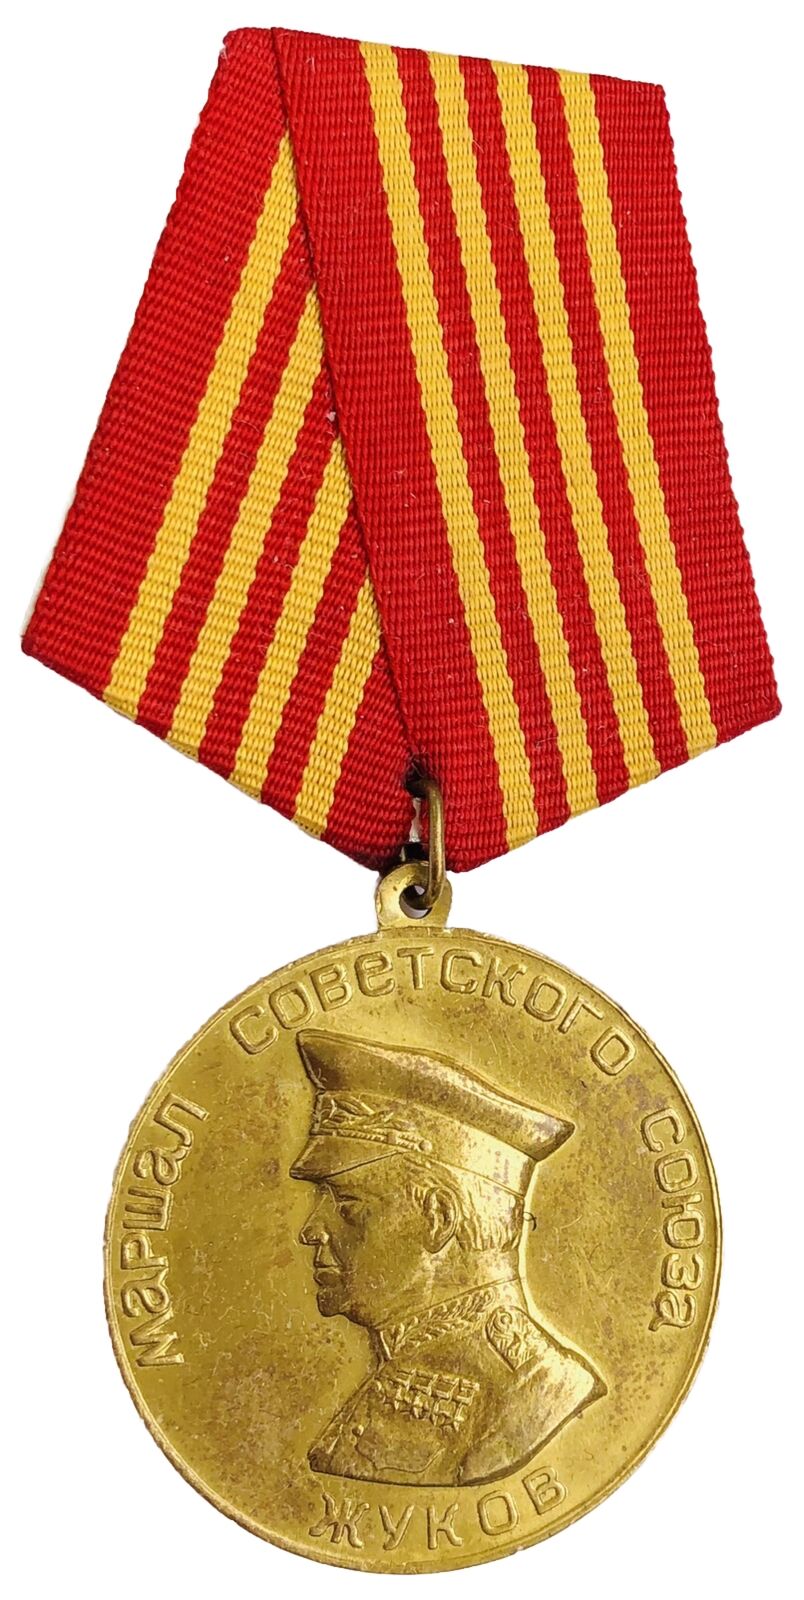 Vintage Russian Military Zhukov USSR Military Communist Medal Pin Badge 1996year